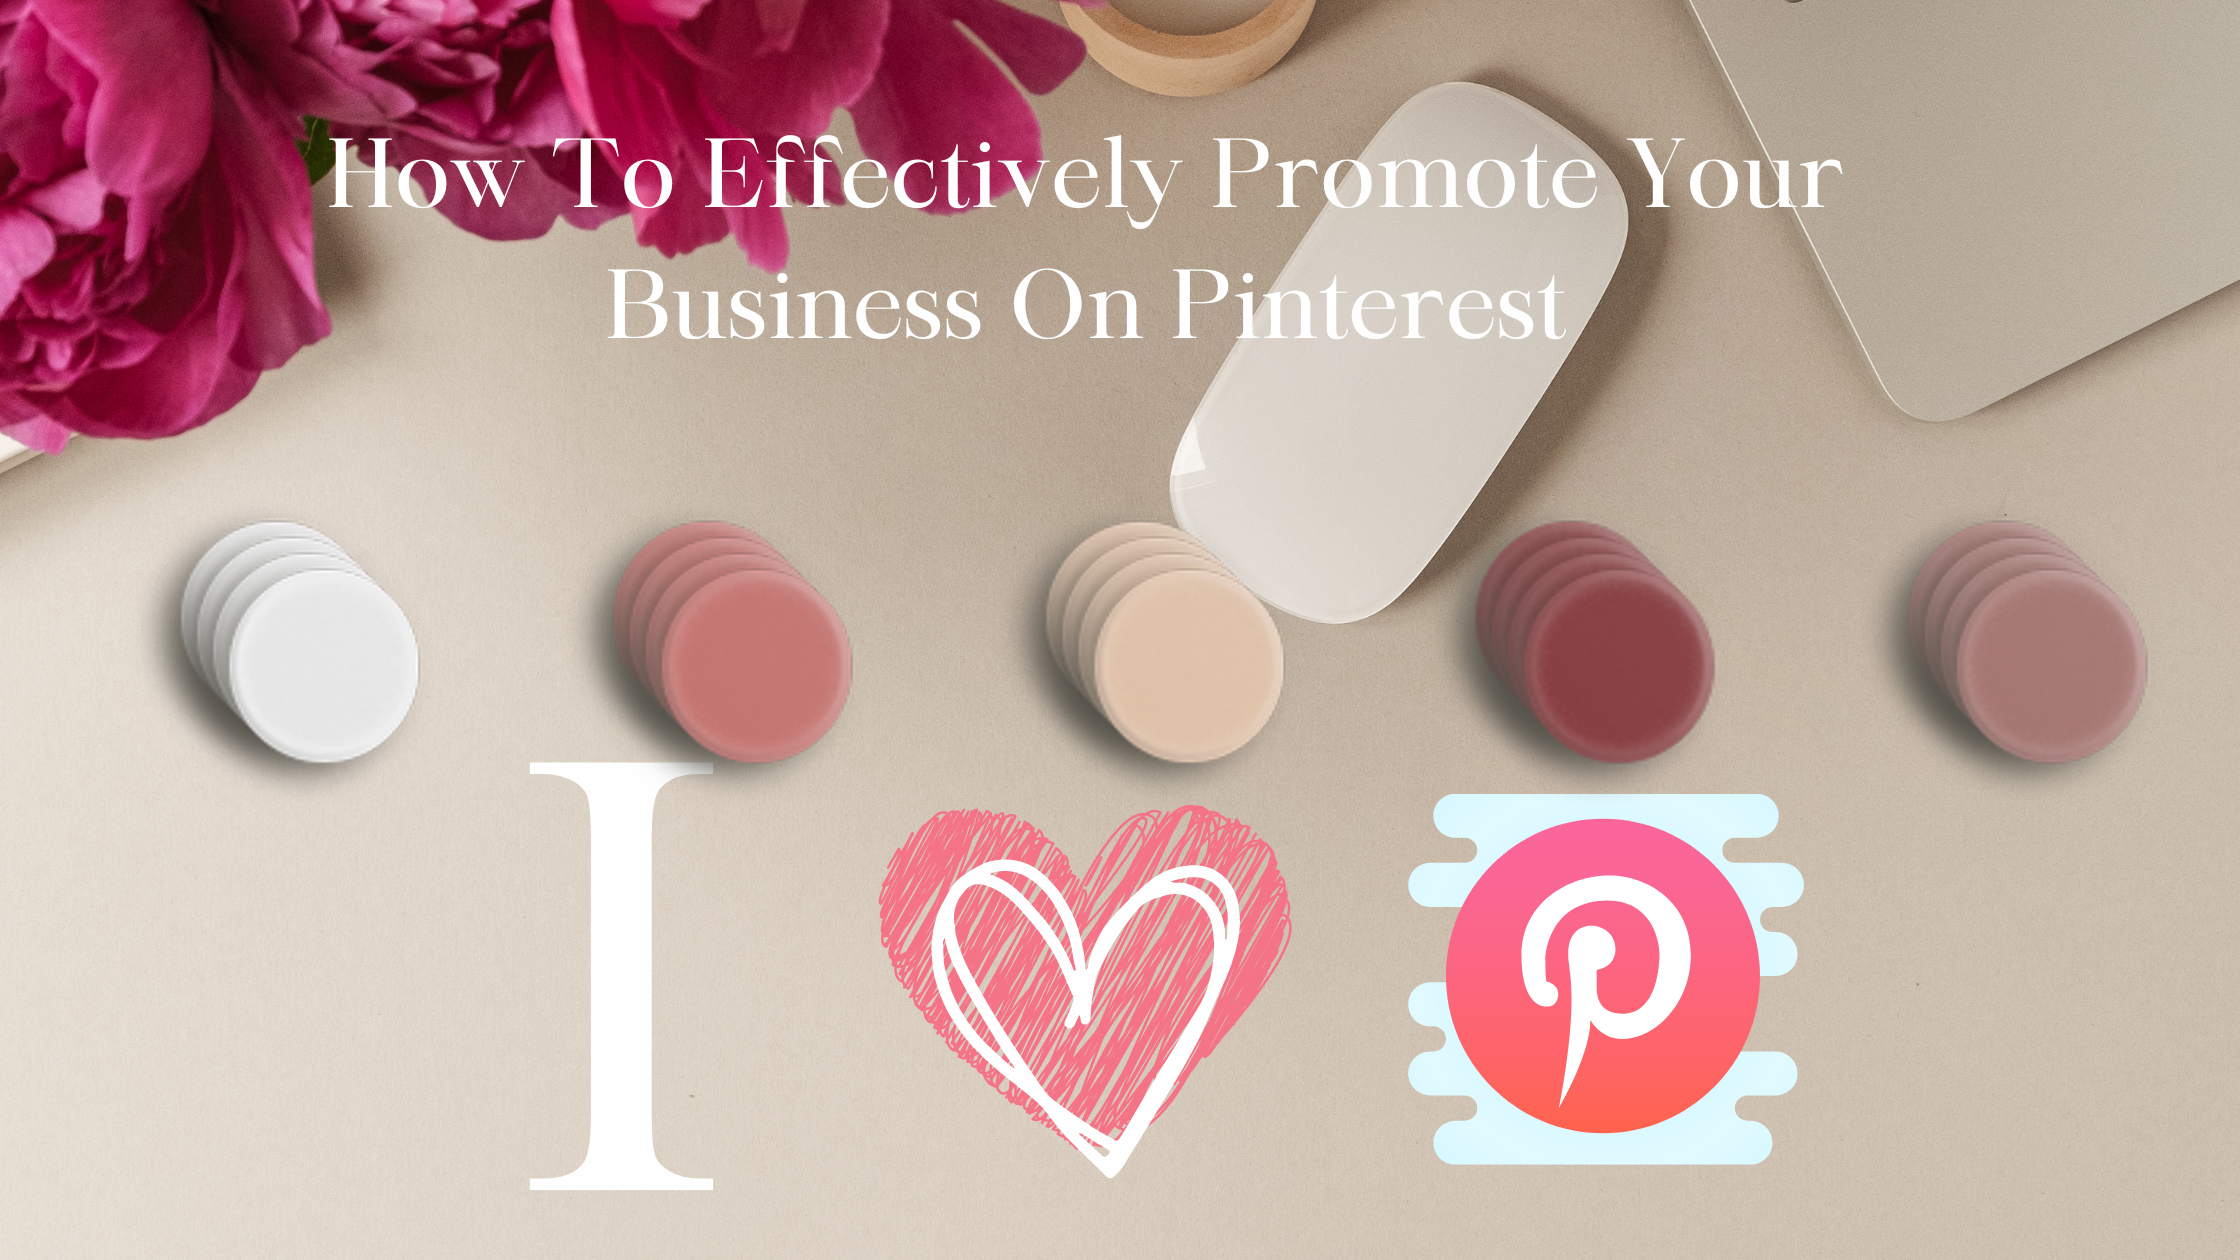 How To Effectively Promote Your Business On Pinterest